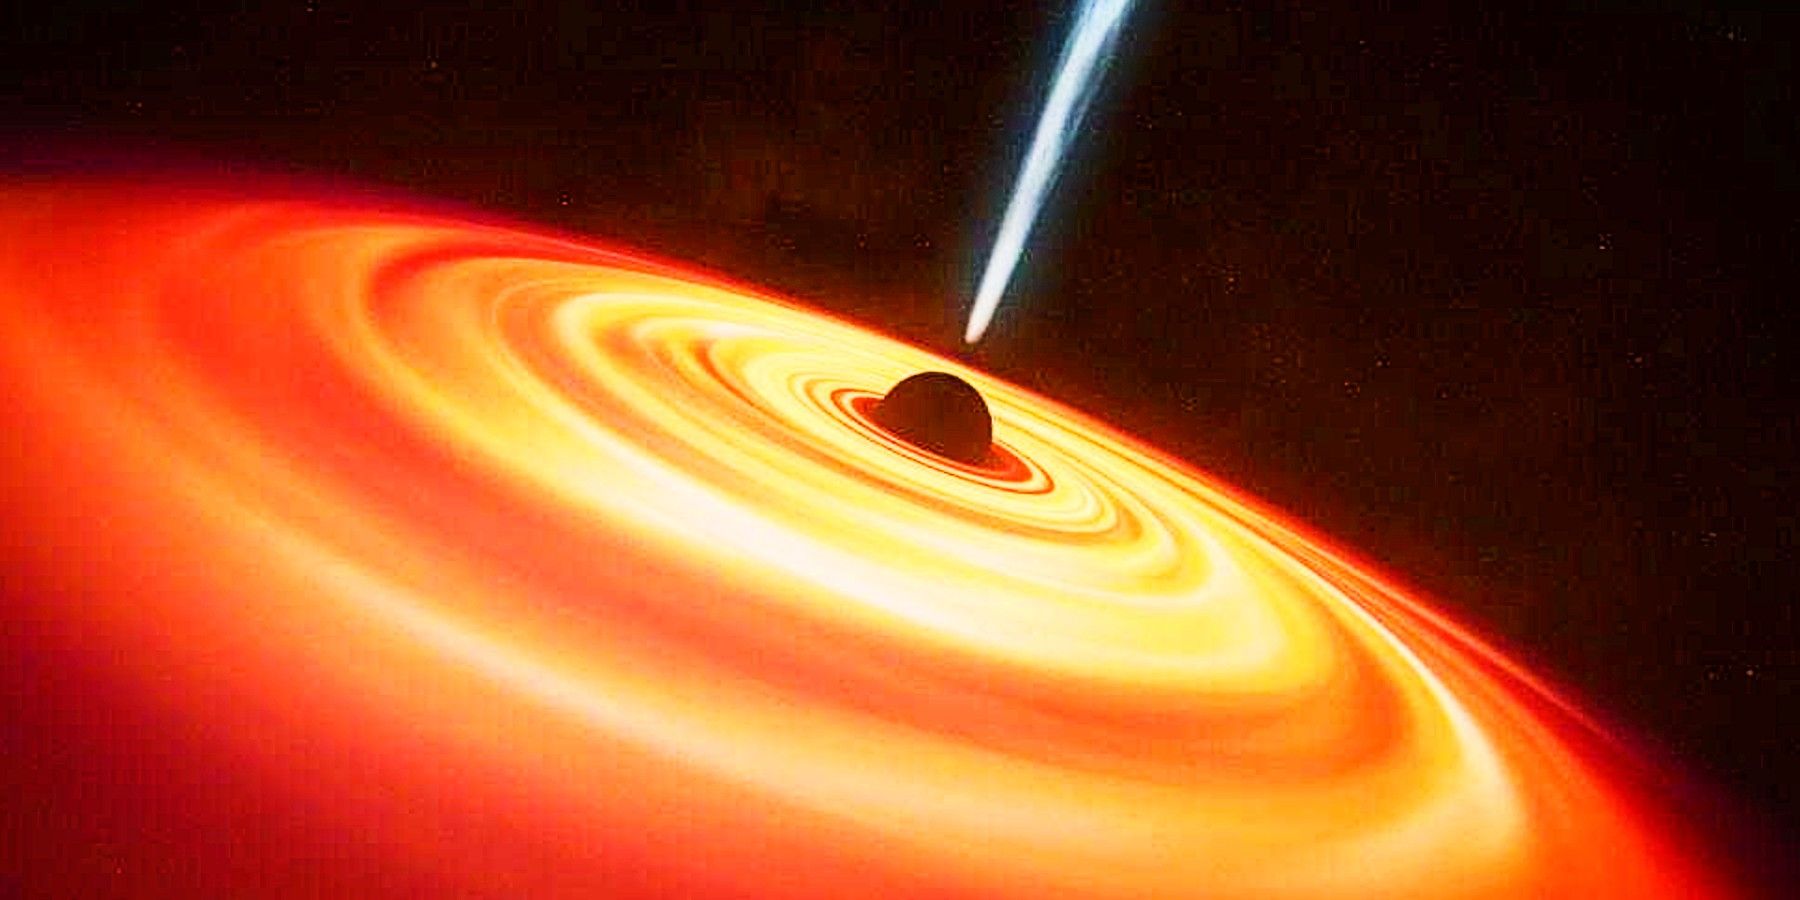 Brian Cox: “James Webb Just Discovered The True Scale Of Black holes!”